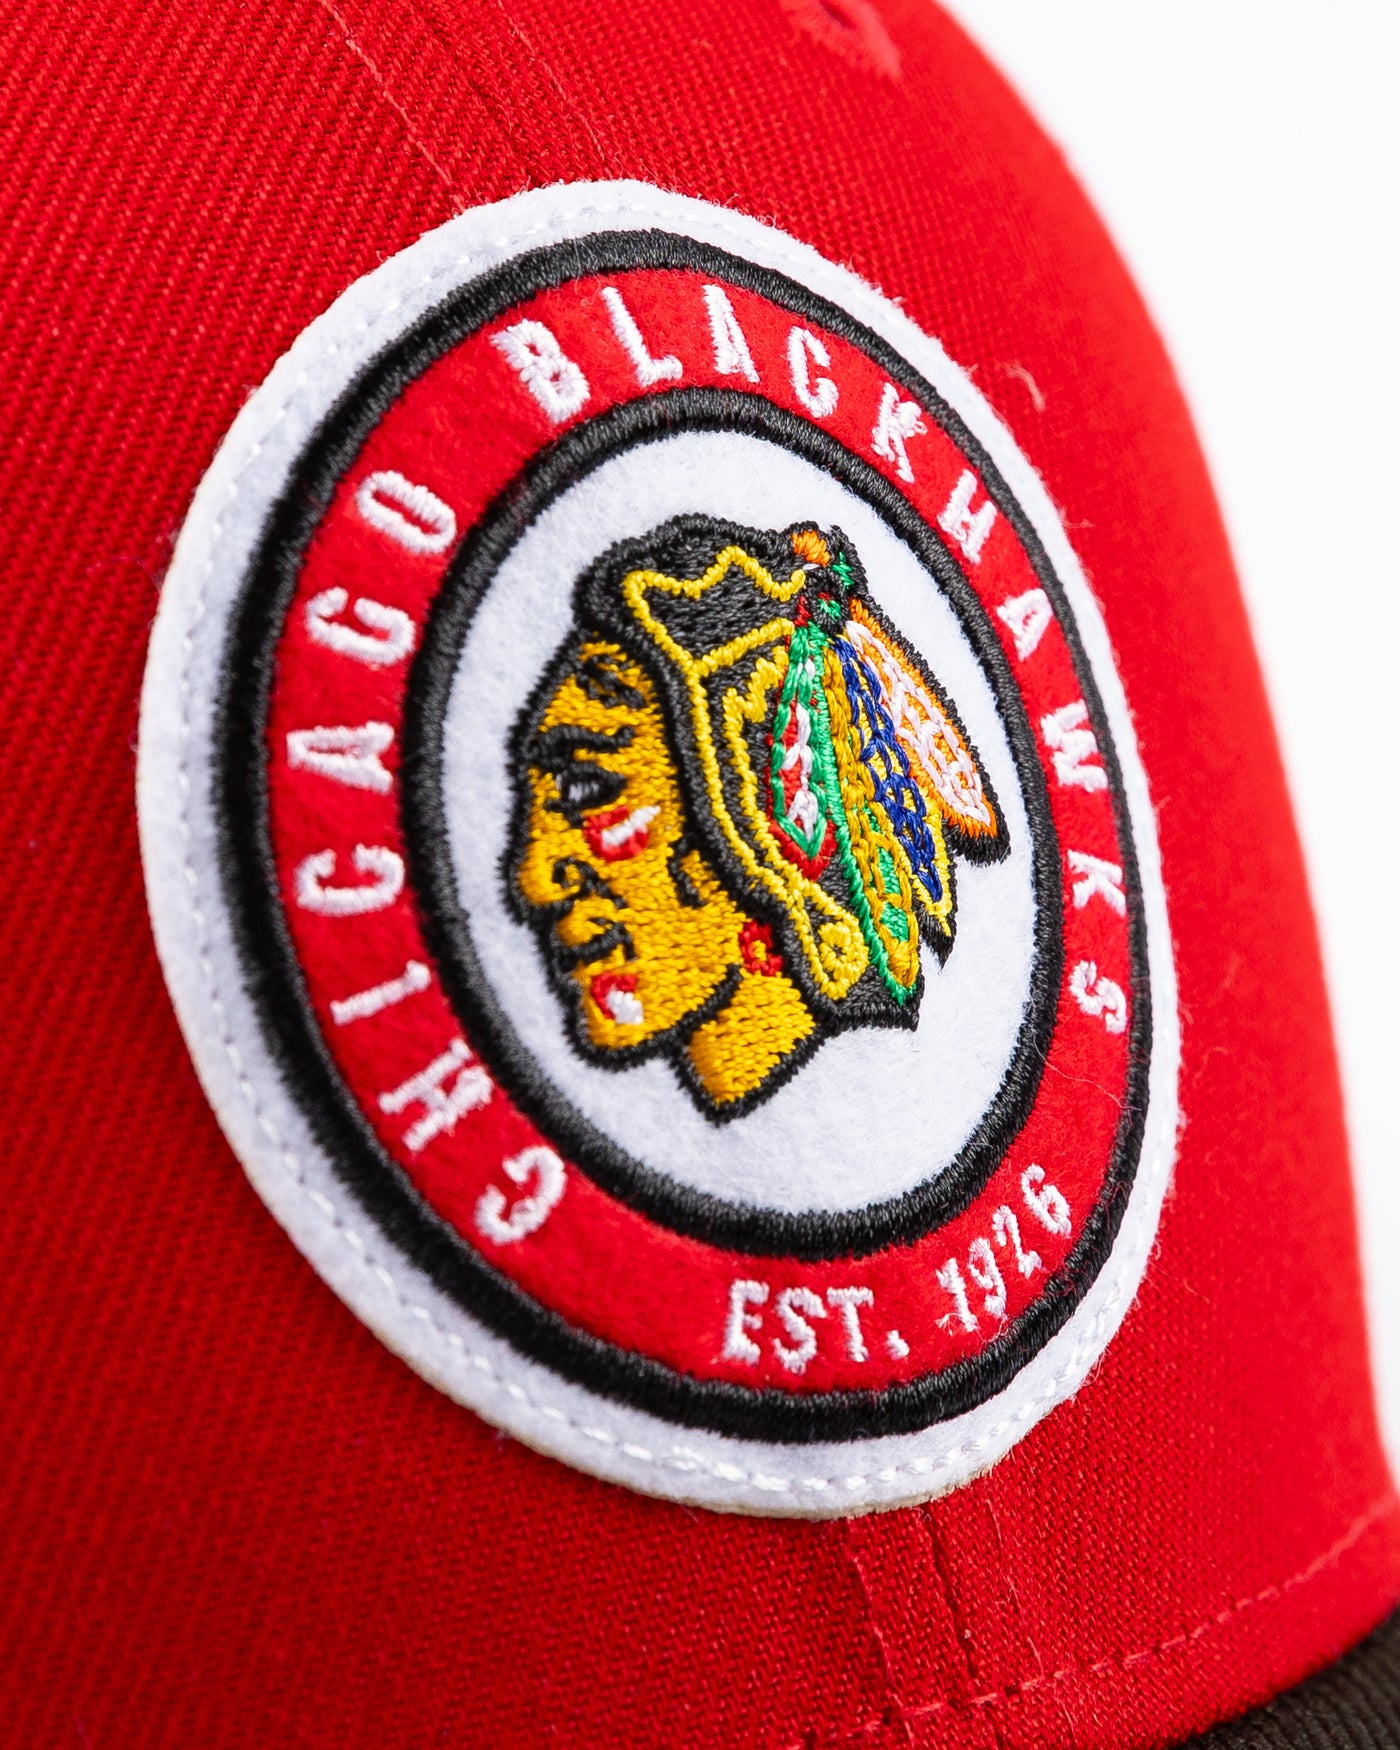 New Era 9FIFTY trucker snapback cap with Chicago Blackhawks throwback logo embroidered on front - detail lay flat